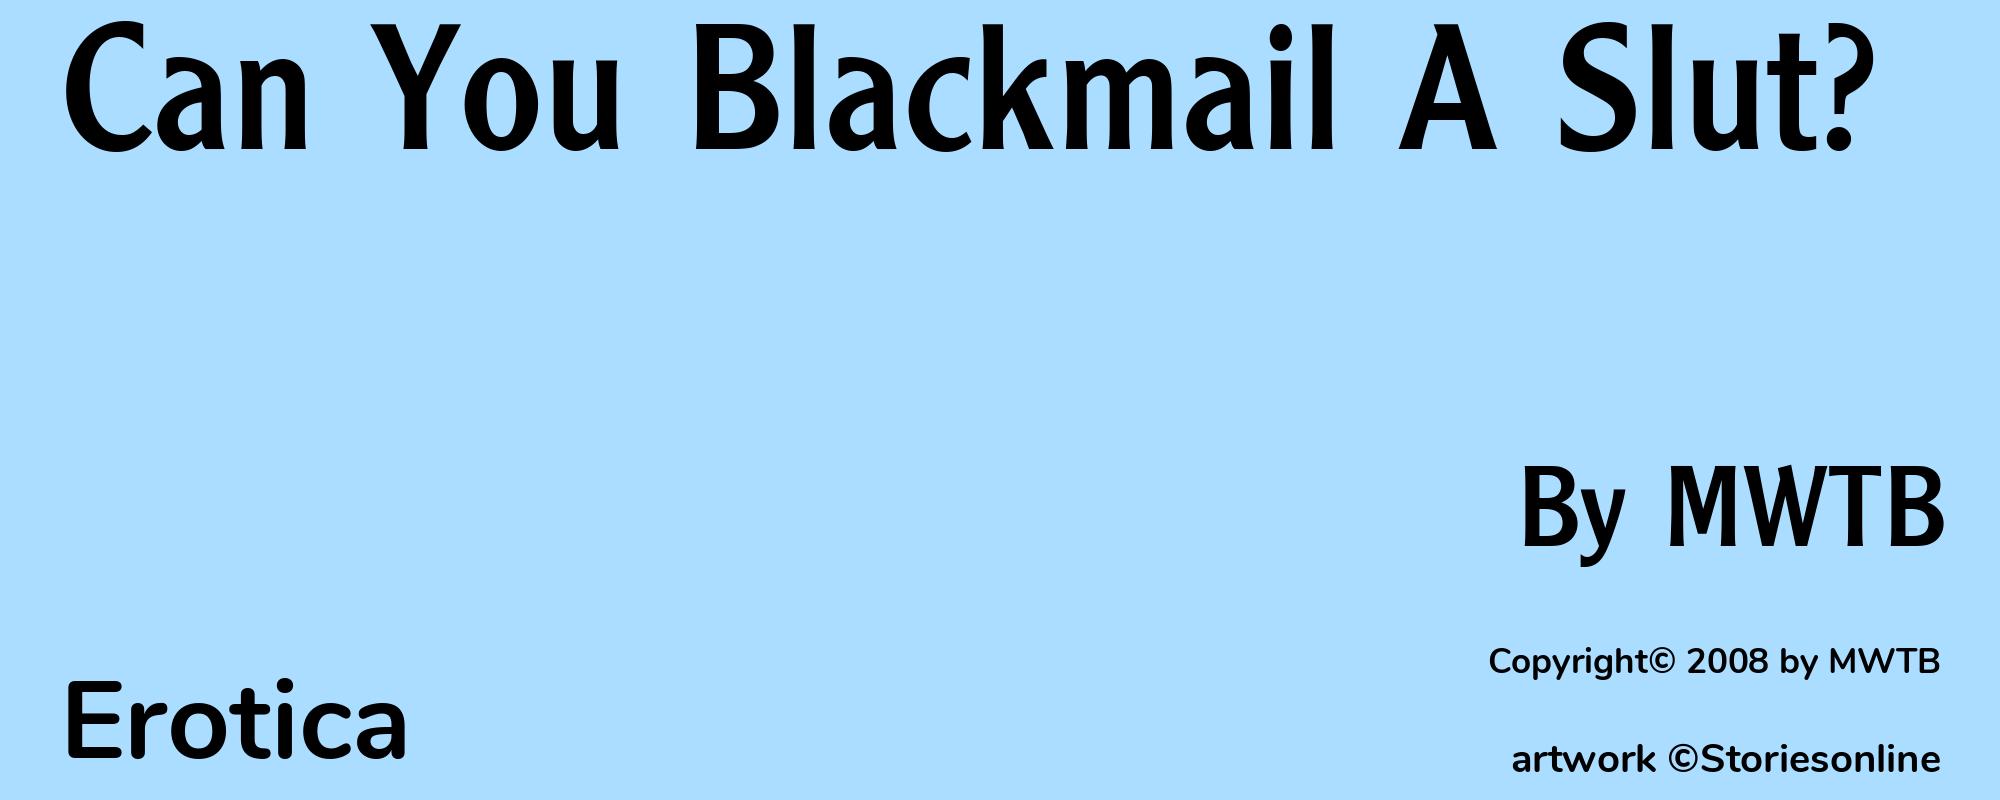 Can You Blackmail A Slut? - Cover